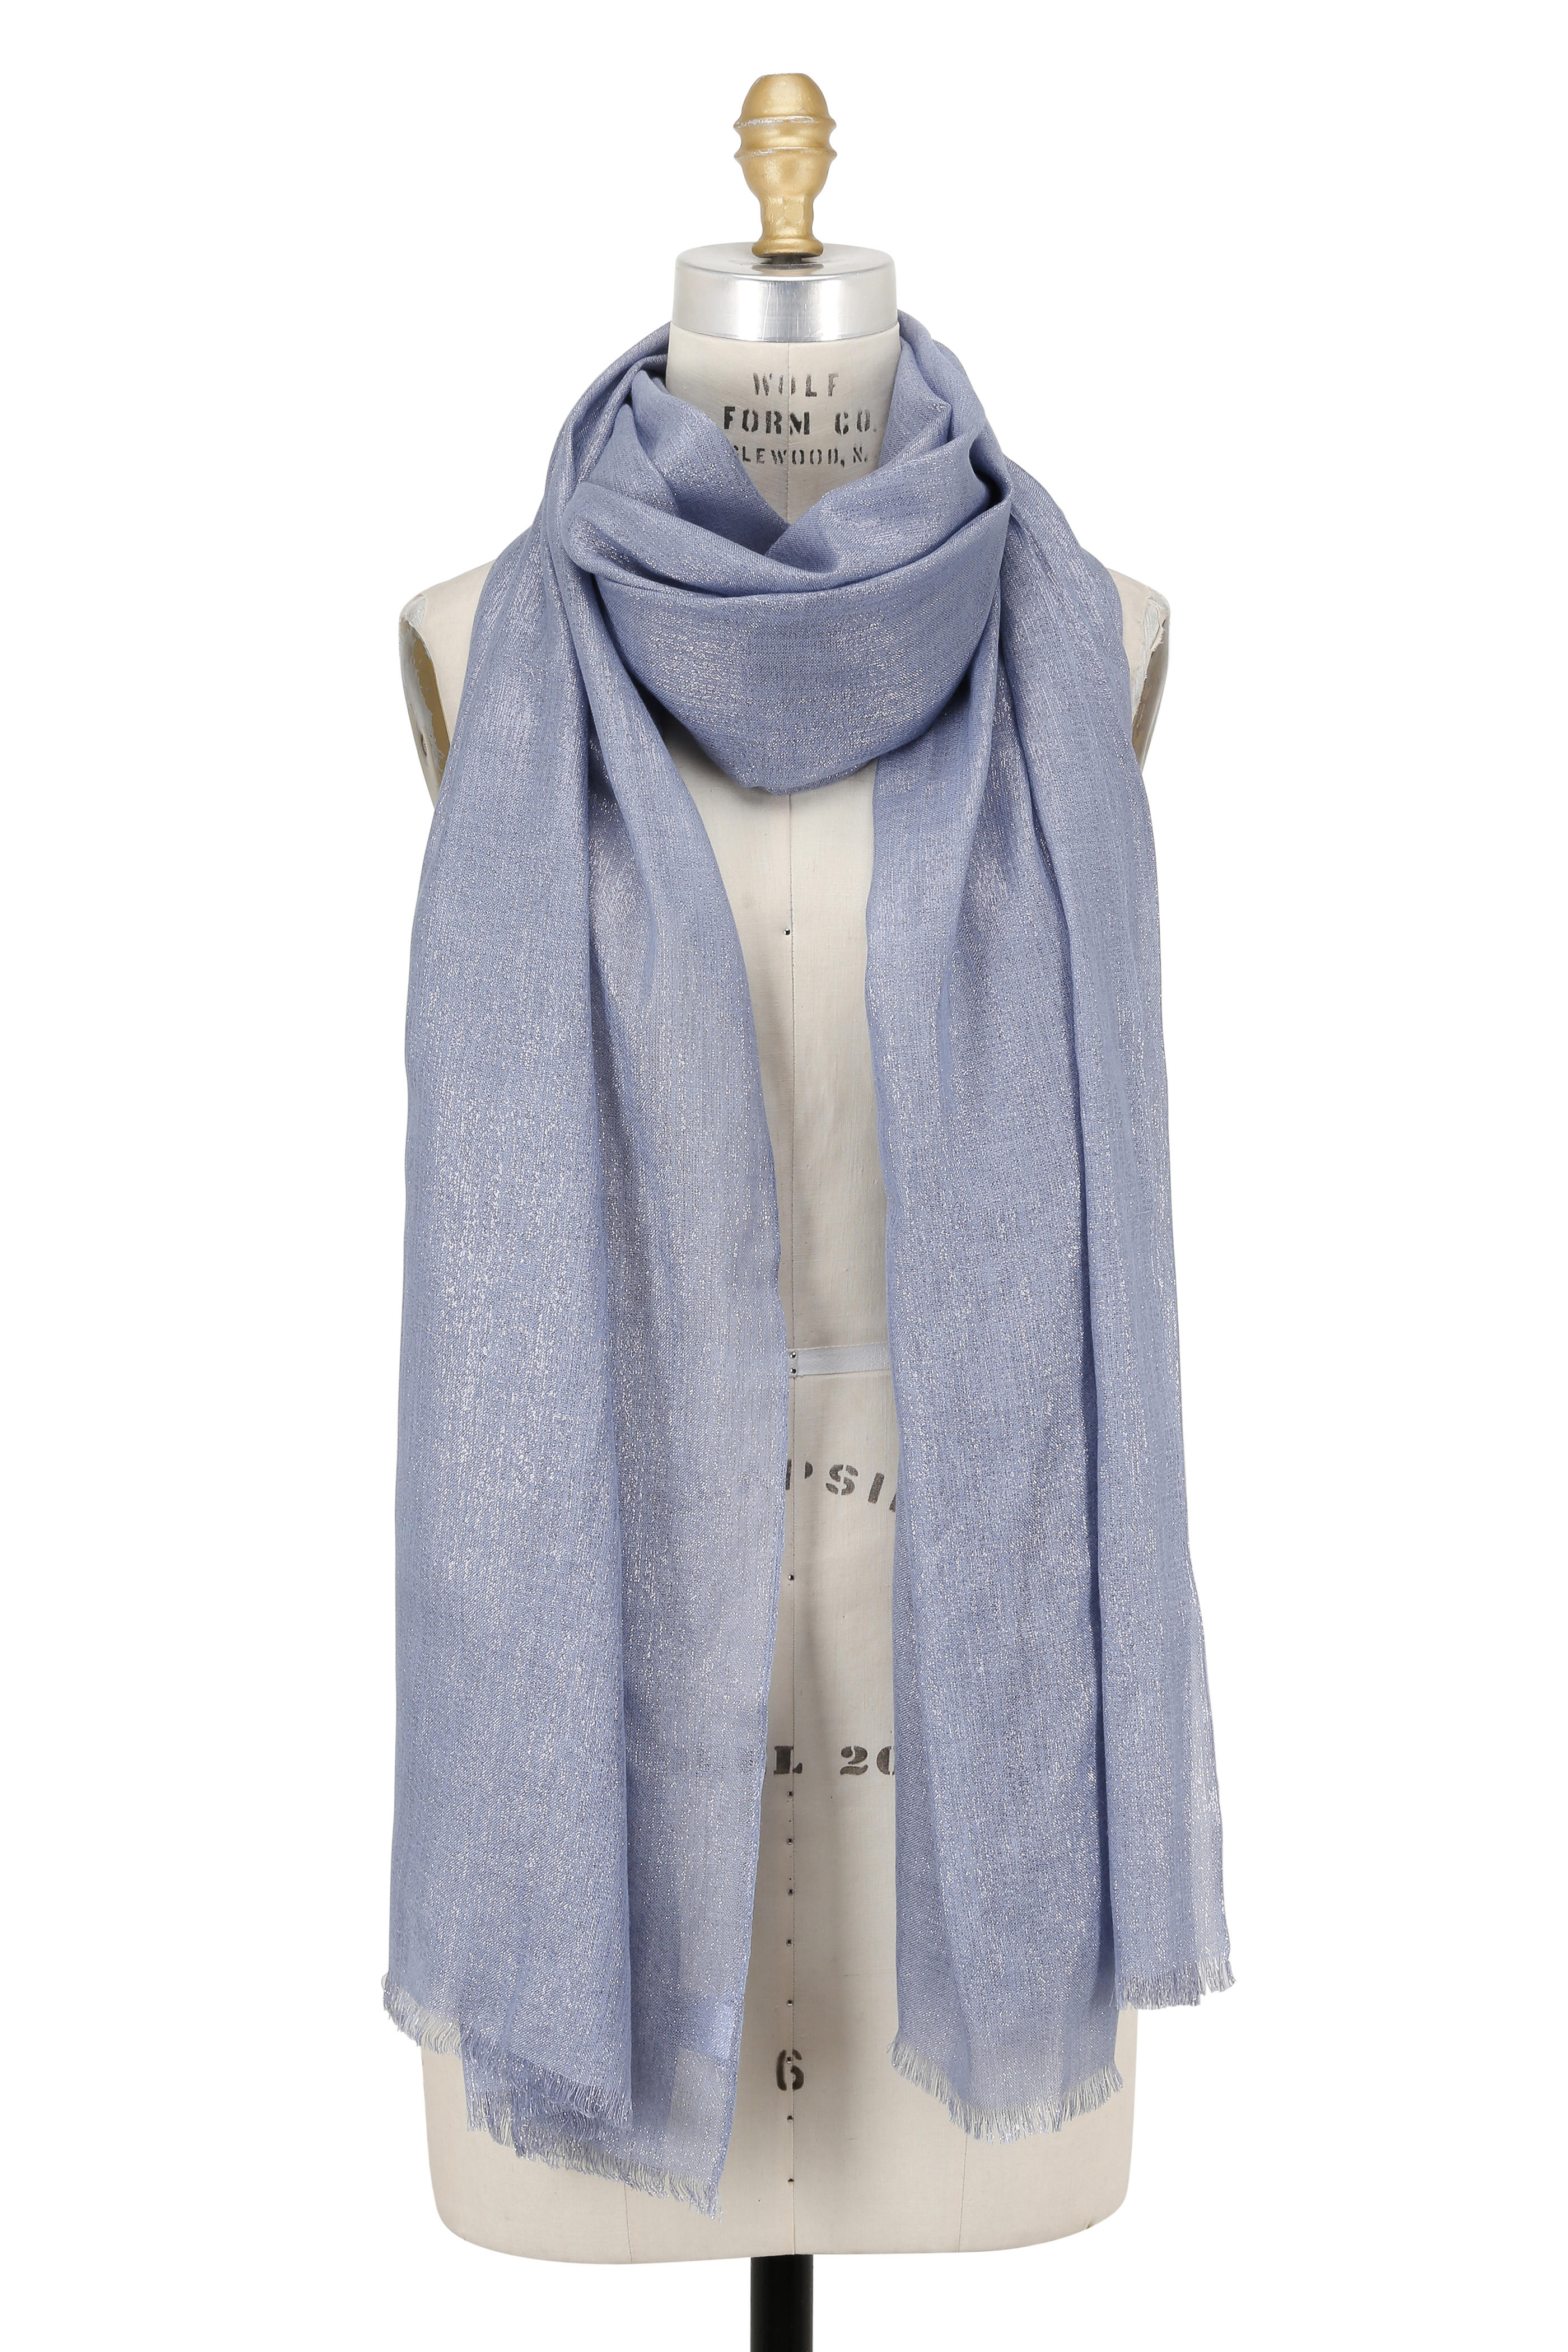 periwinkle scarf cashmere